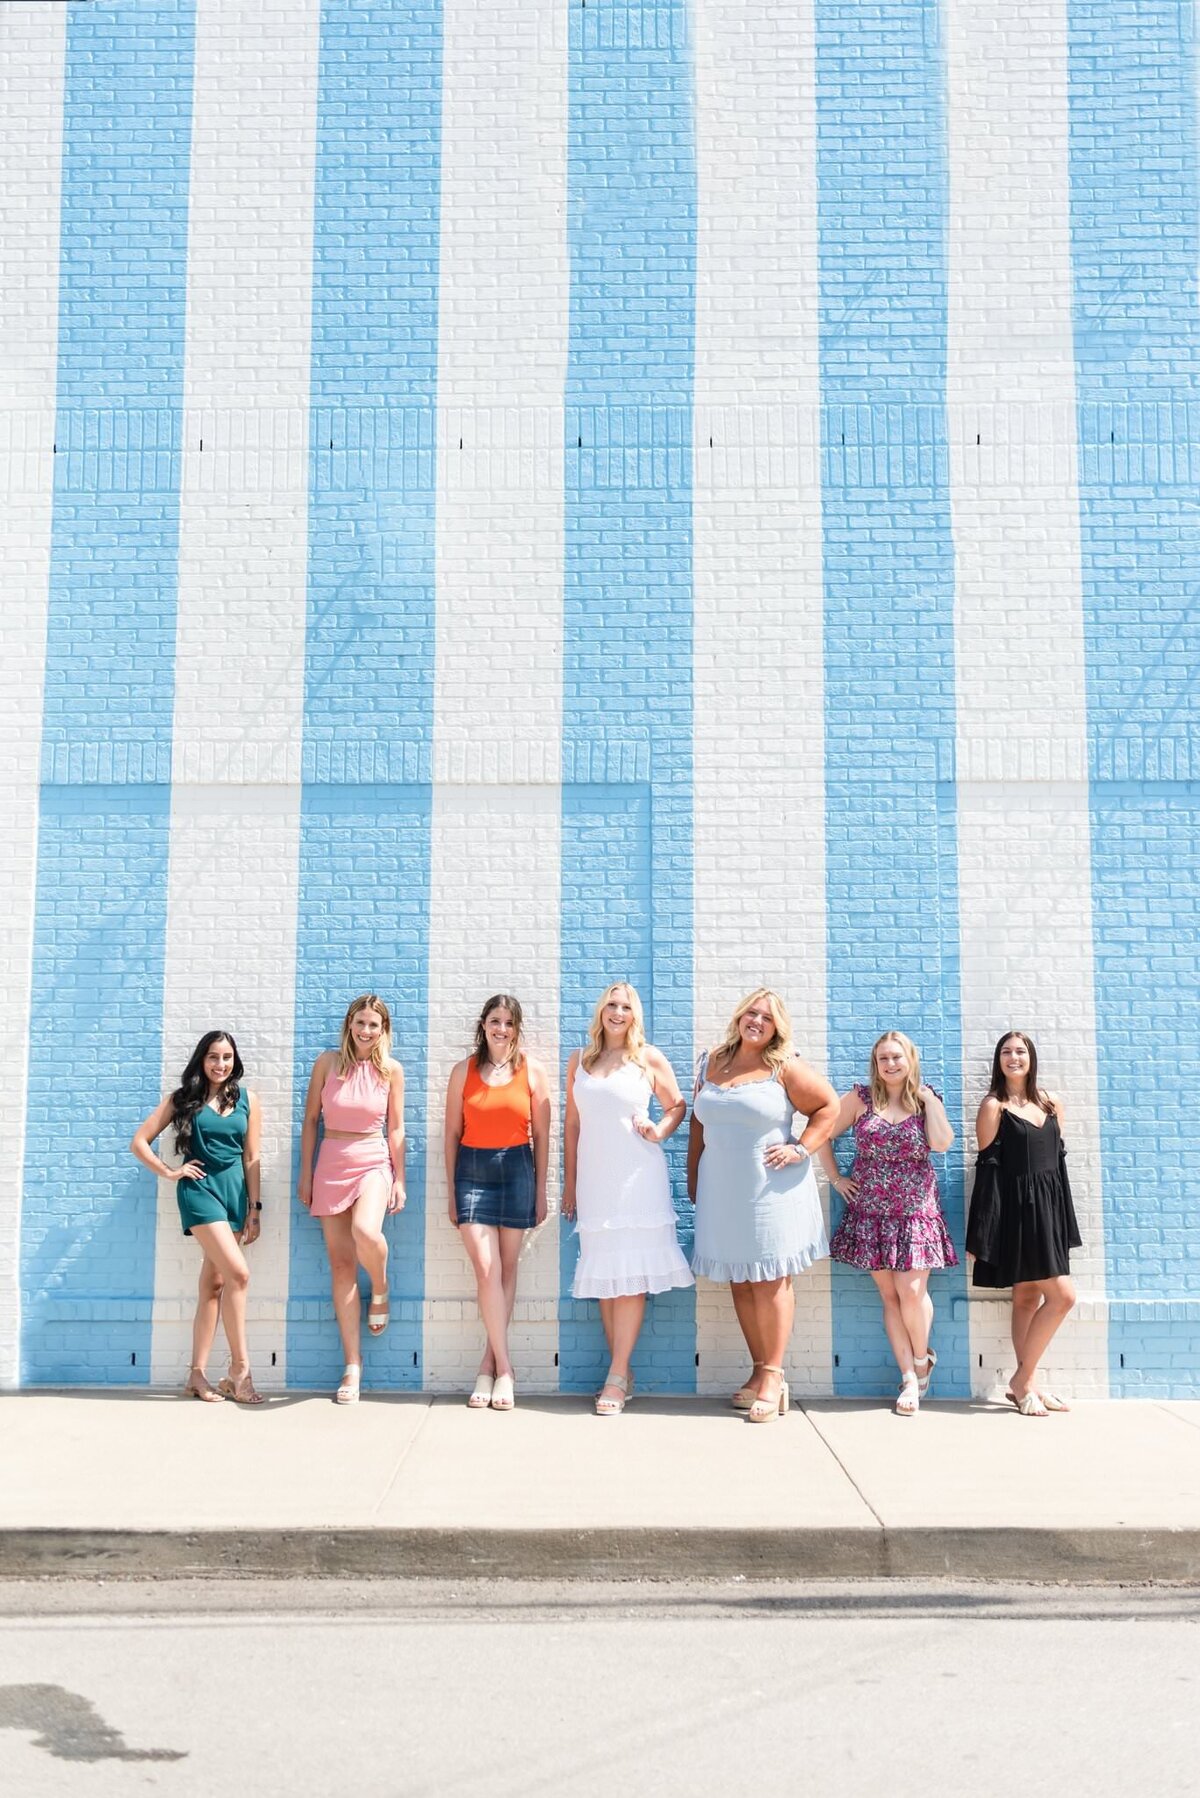 12th-South-Nashville-Bachelorette-Photoshoot-Striped-Blue-and-White-Wall+1